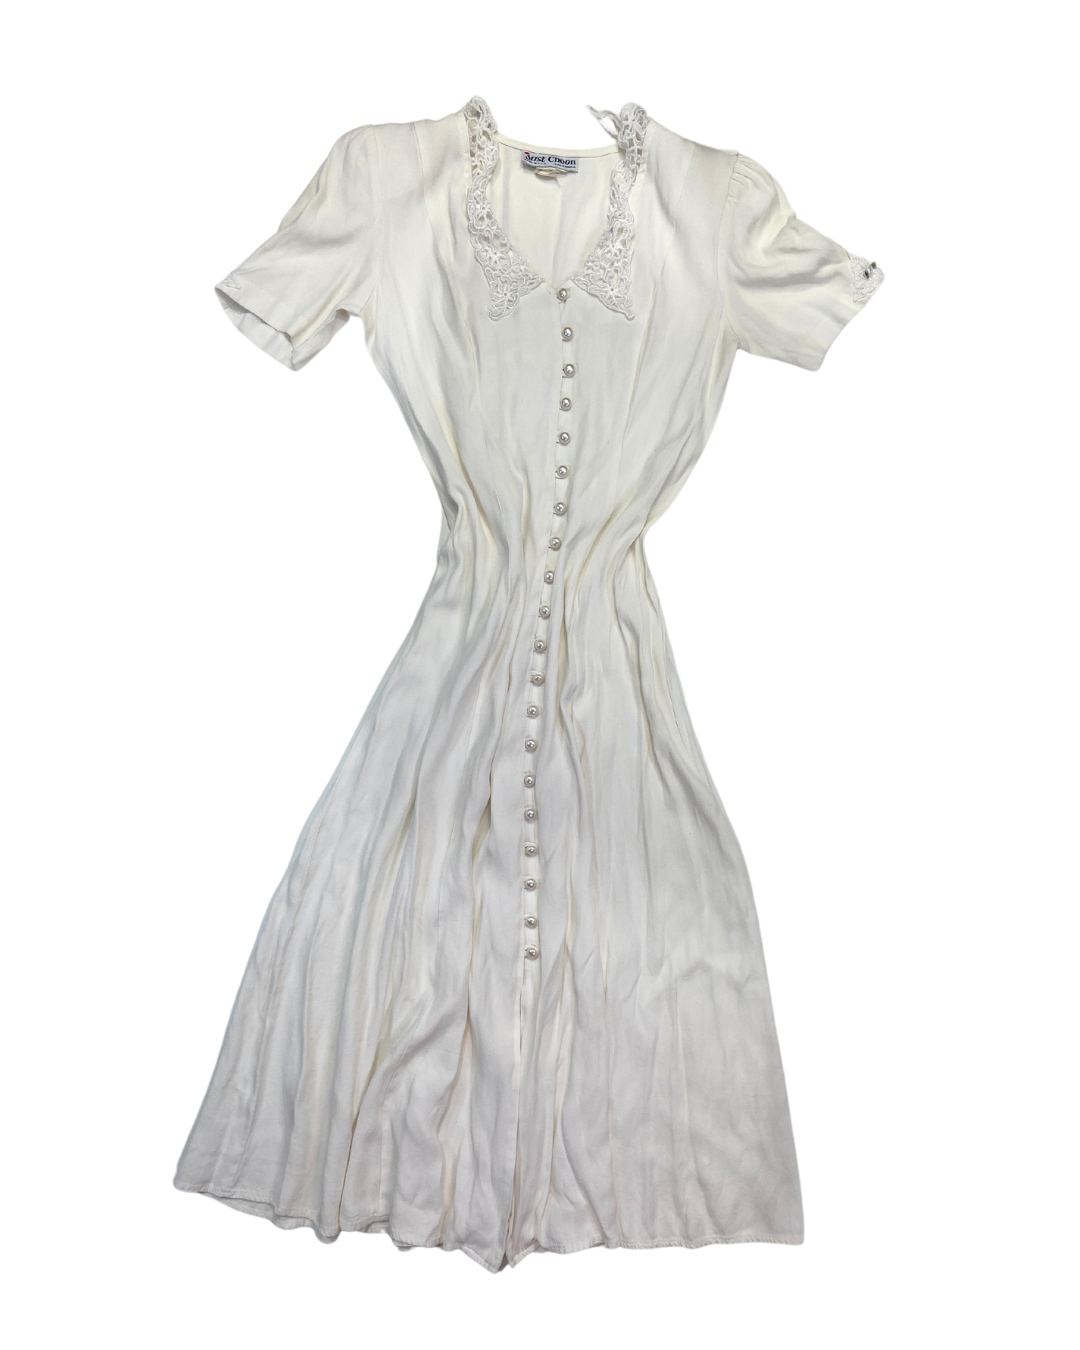 Just Choon White Vintage Button Up Dress